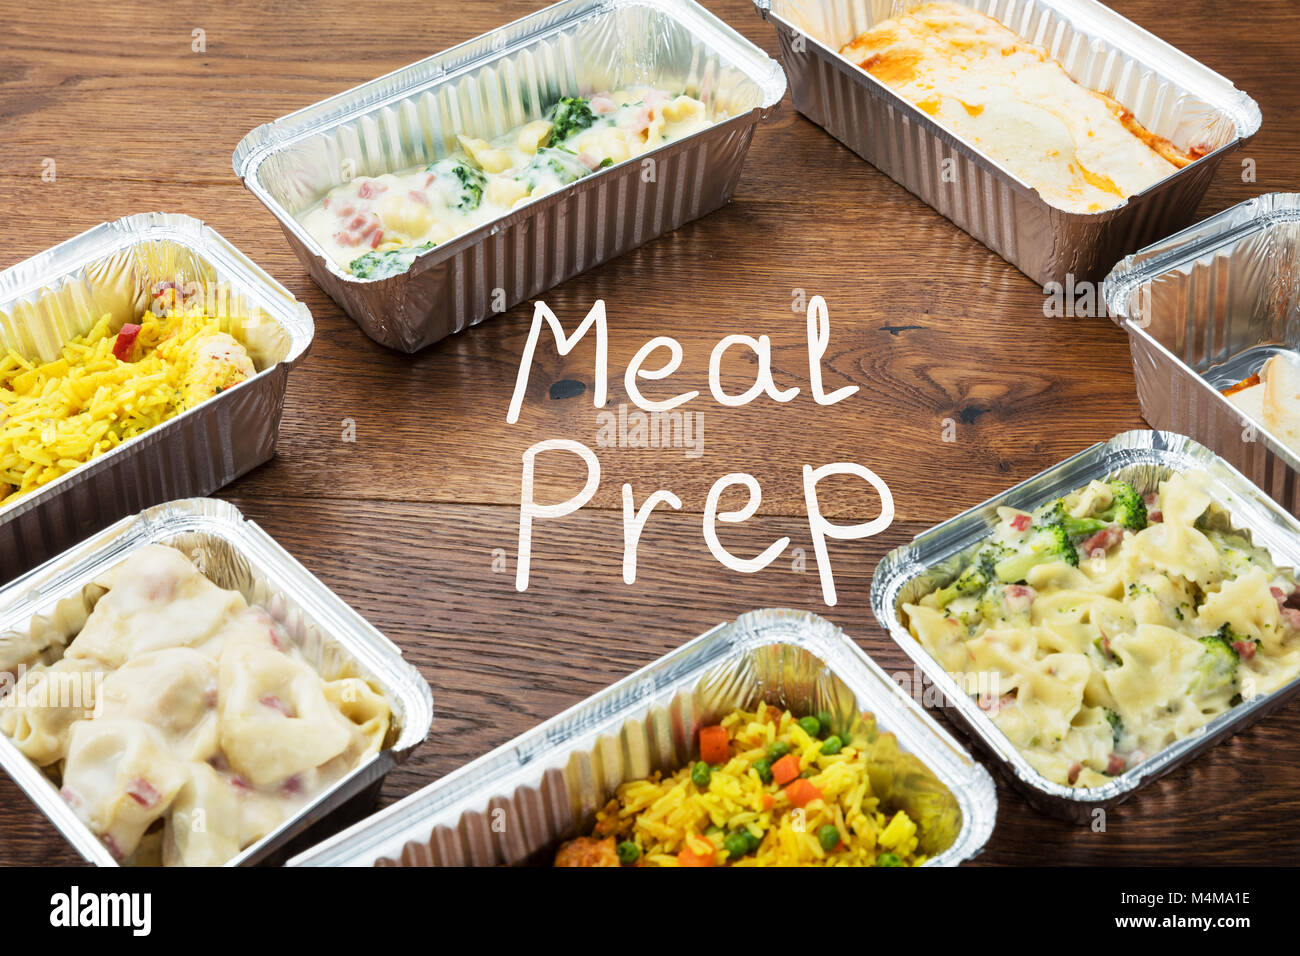 The Word Meal Preparation Written On Table With Takeaway Meal In Foil Containers Stock Photo